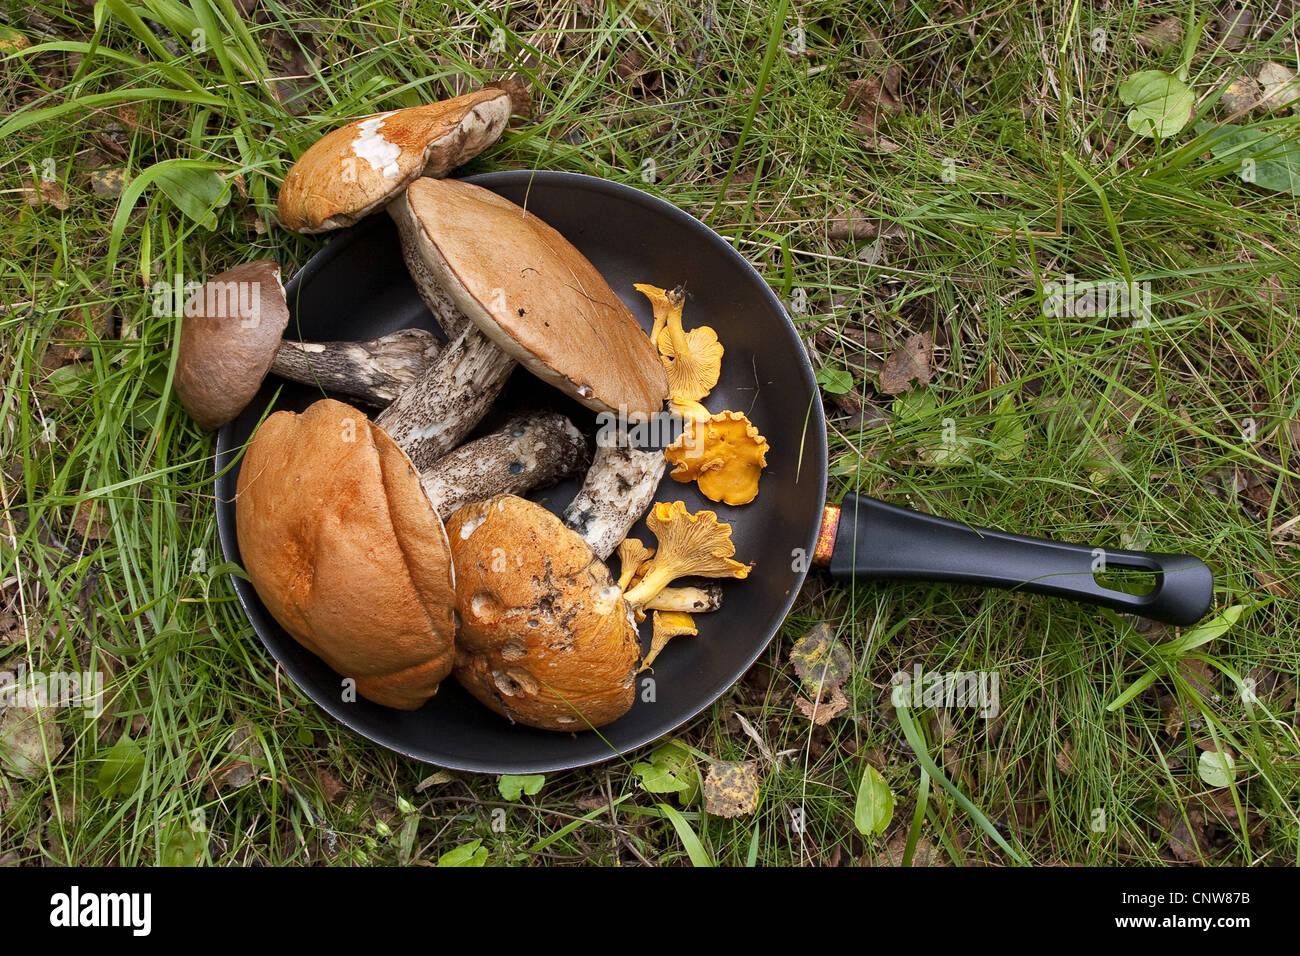 brown birch bolete (Leccinum scabrum), collected mushrooms in a pan, Germany Stock Photo